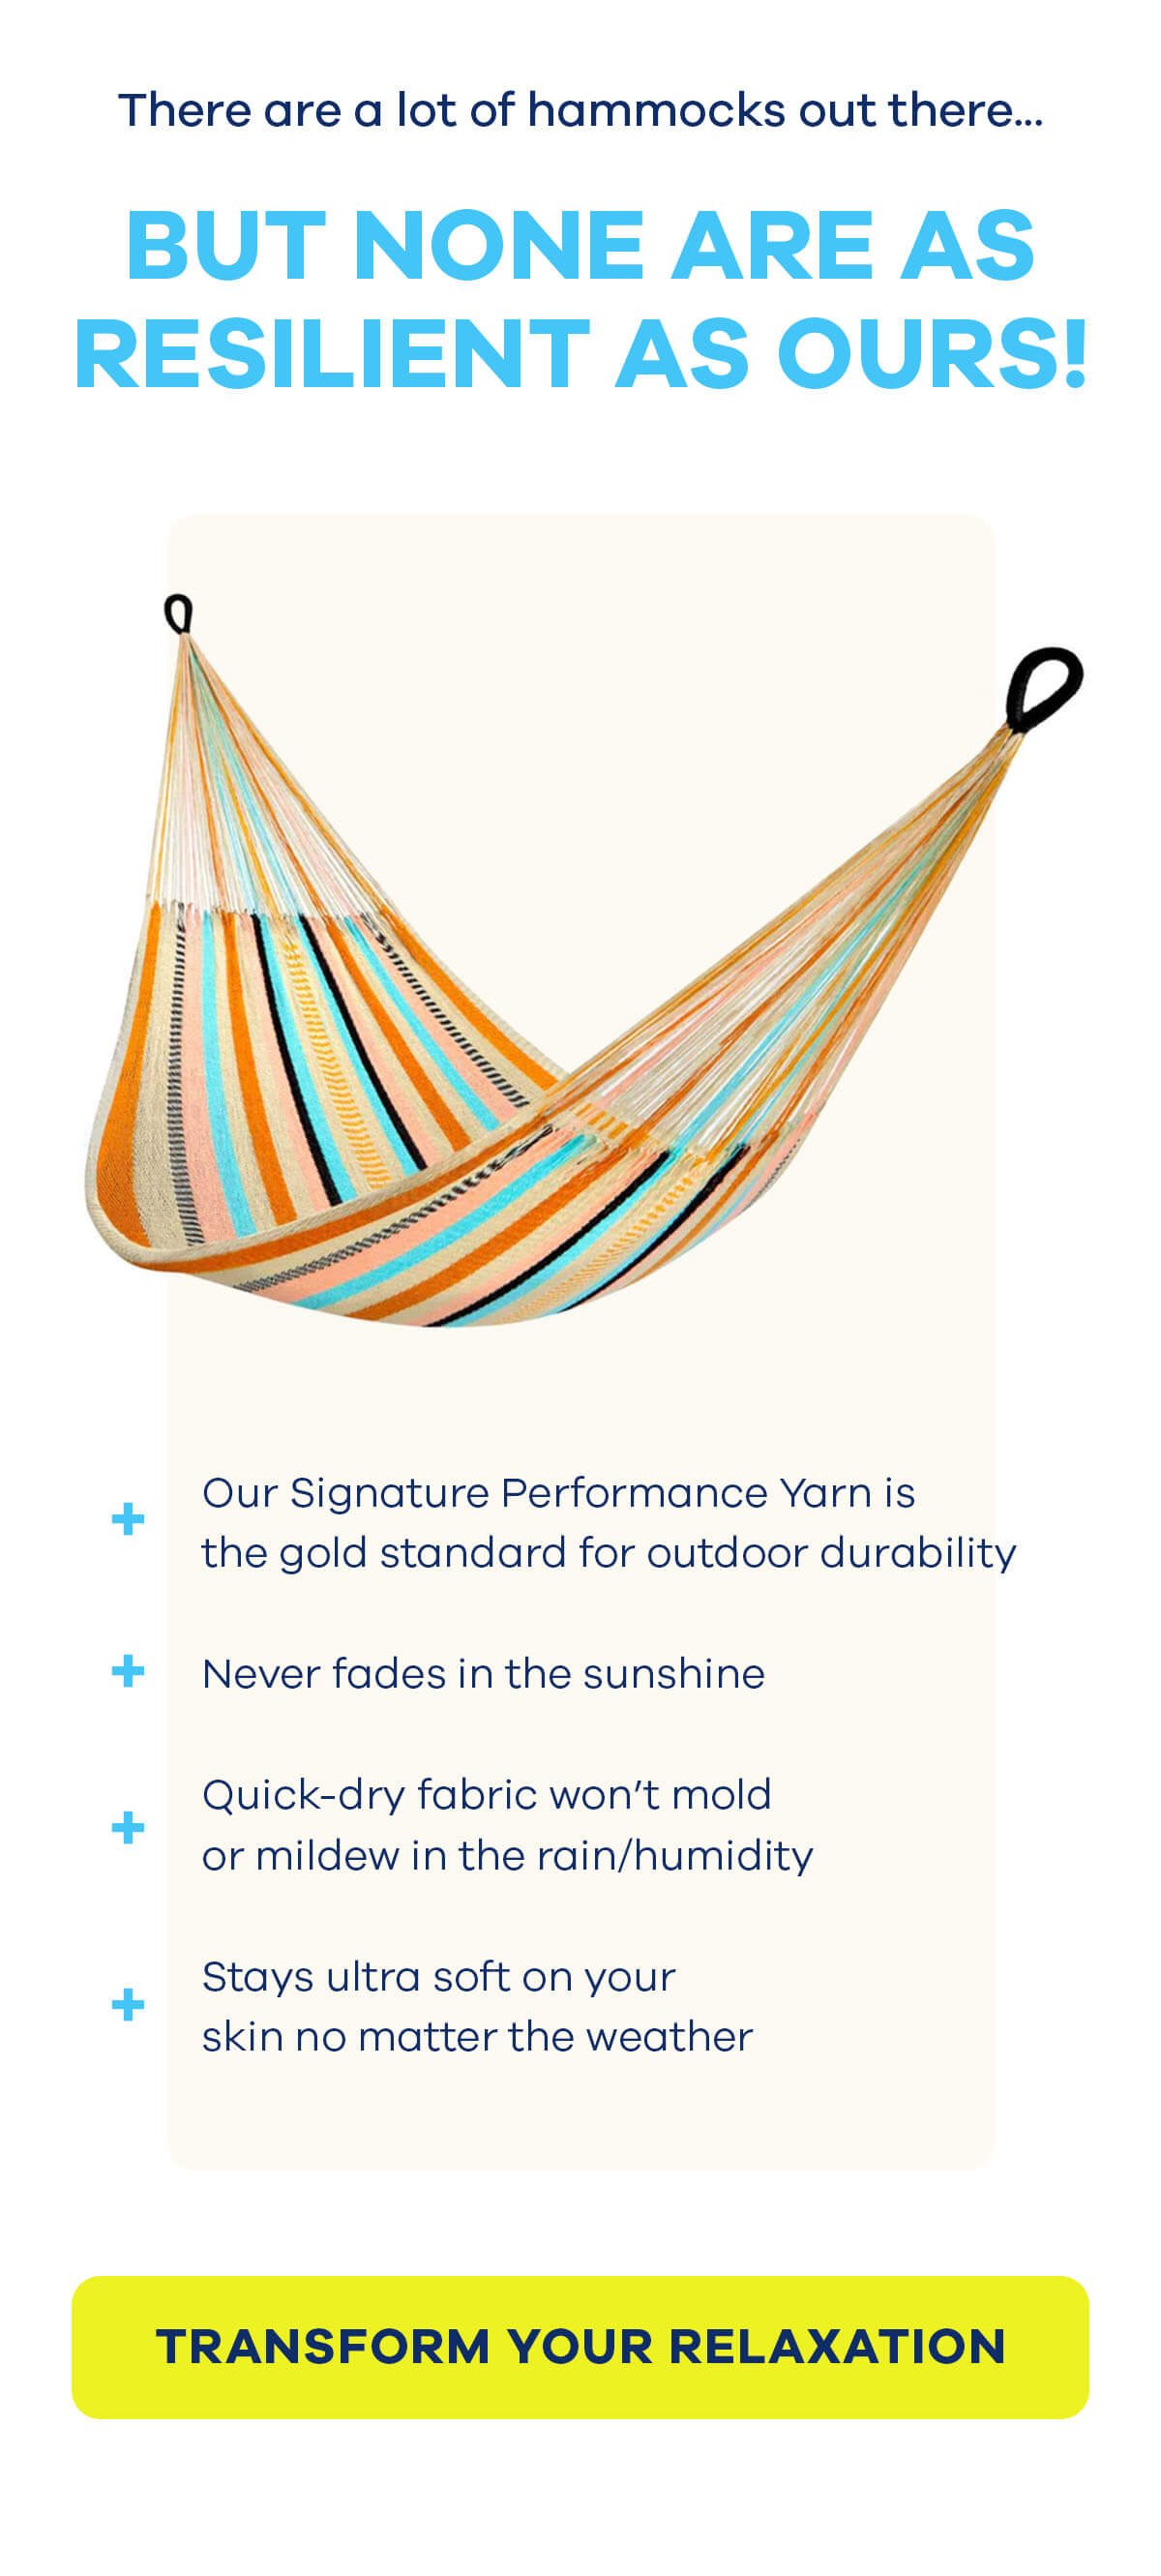 There are a lot of hammocks out there.... BUT NONE ARE AS RESILIENT AS OURS! Our Signature Performance Yarn is the gold standard for outdoor durability Never fades in the sunshine Quick-dry fabric won't mold or mildew in the rain/humidity Stays ultra soft on your skin no matter the weather TRANSFORM YOUR RELAXATION